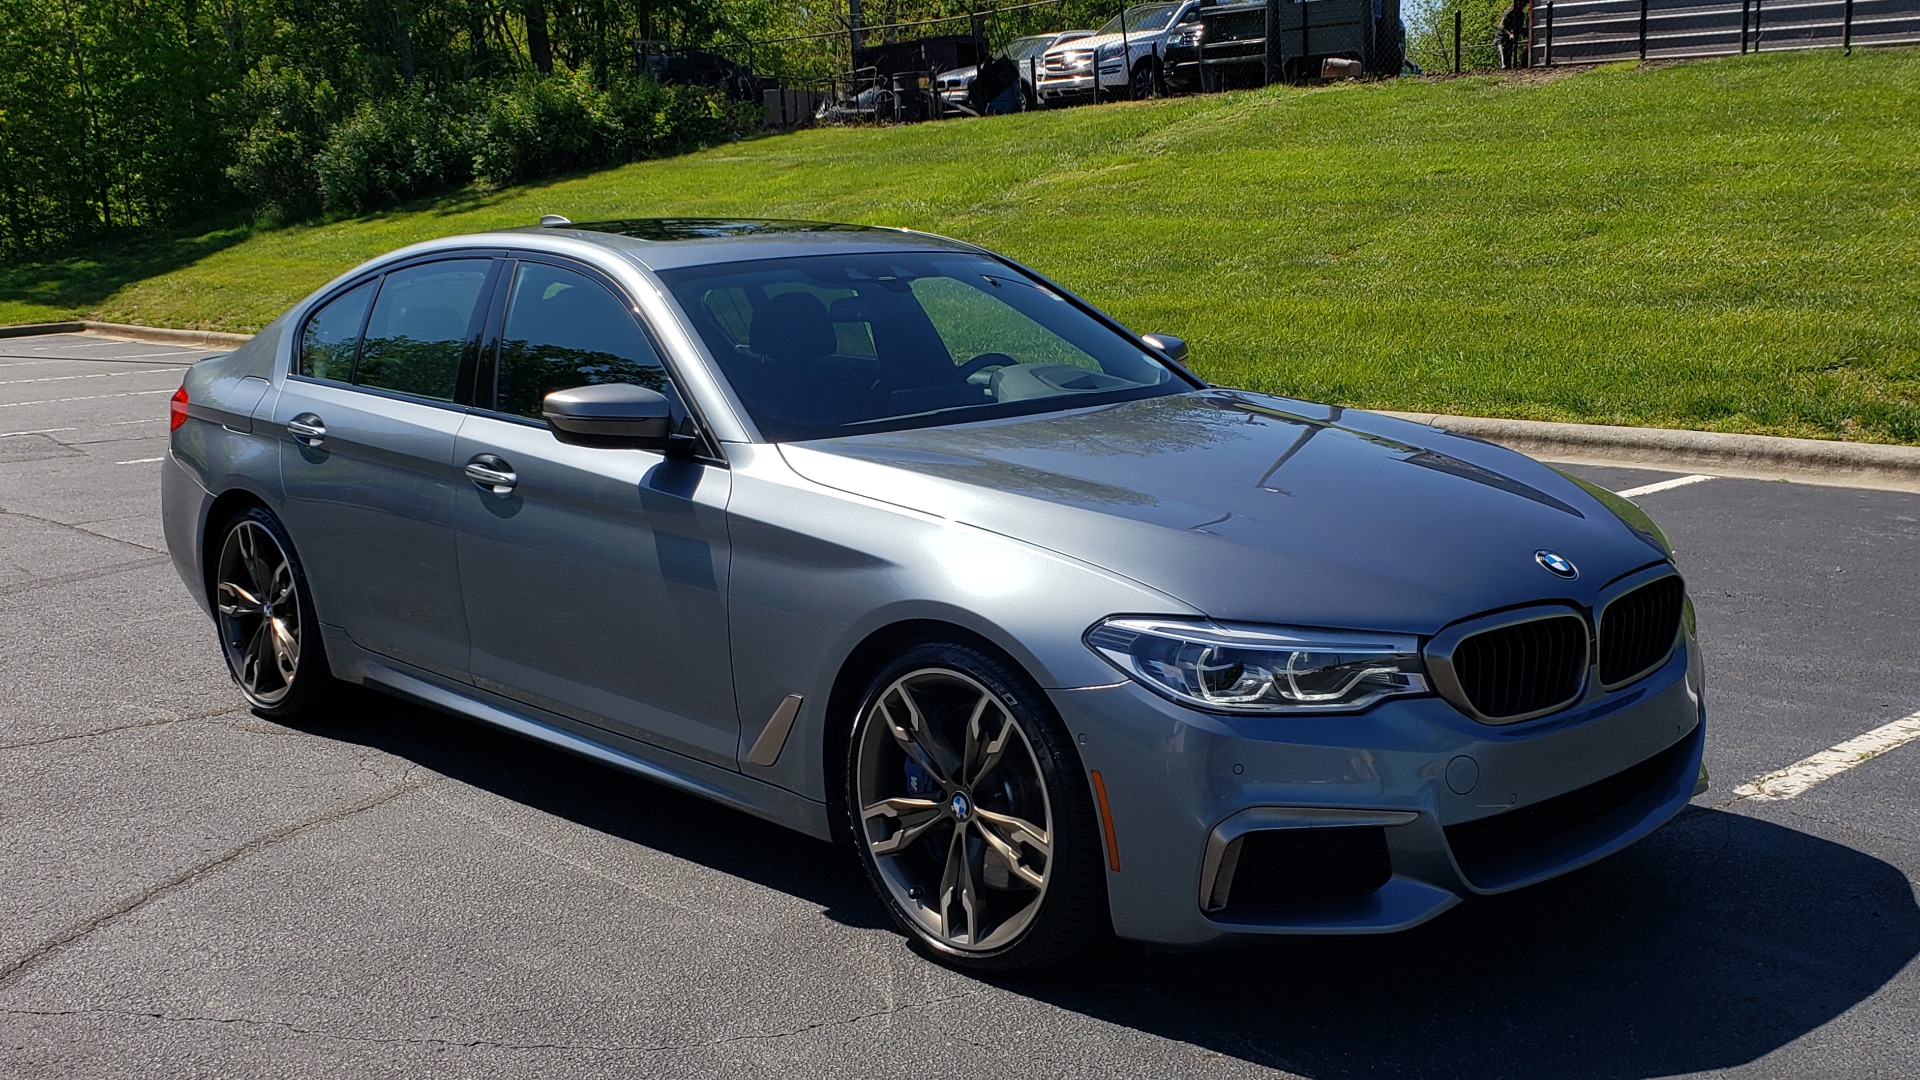 Used 2018 BMW 5 SERIES M550I XDRIVE / EXEC PKG / LUX / DRVR ASST / CLD WTHR / ACTIVE DR for sale Sold at Formula Imports in Charlotte NC 28227 4